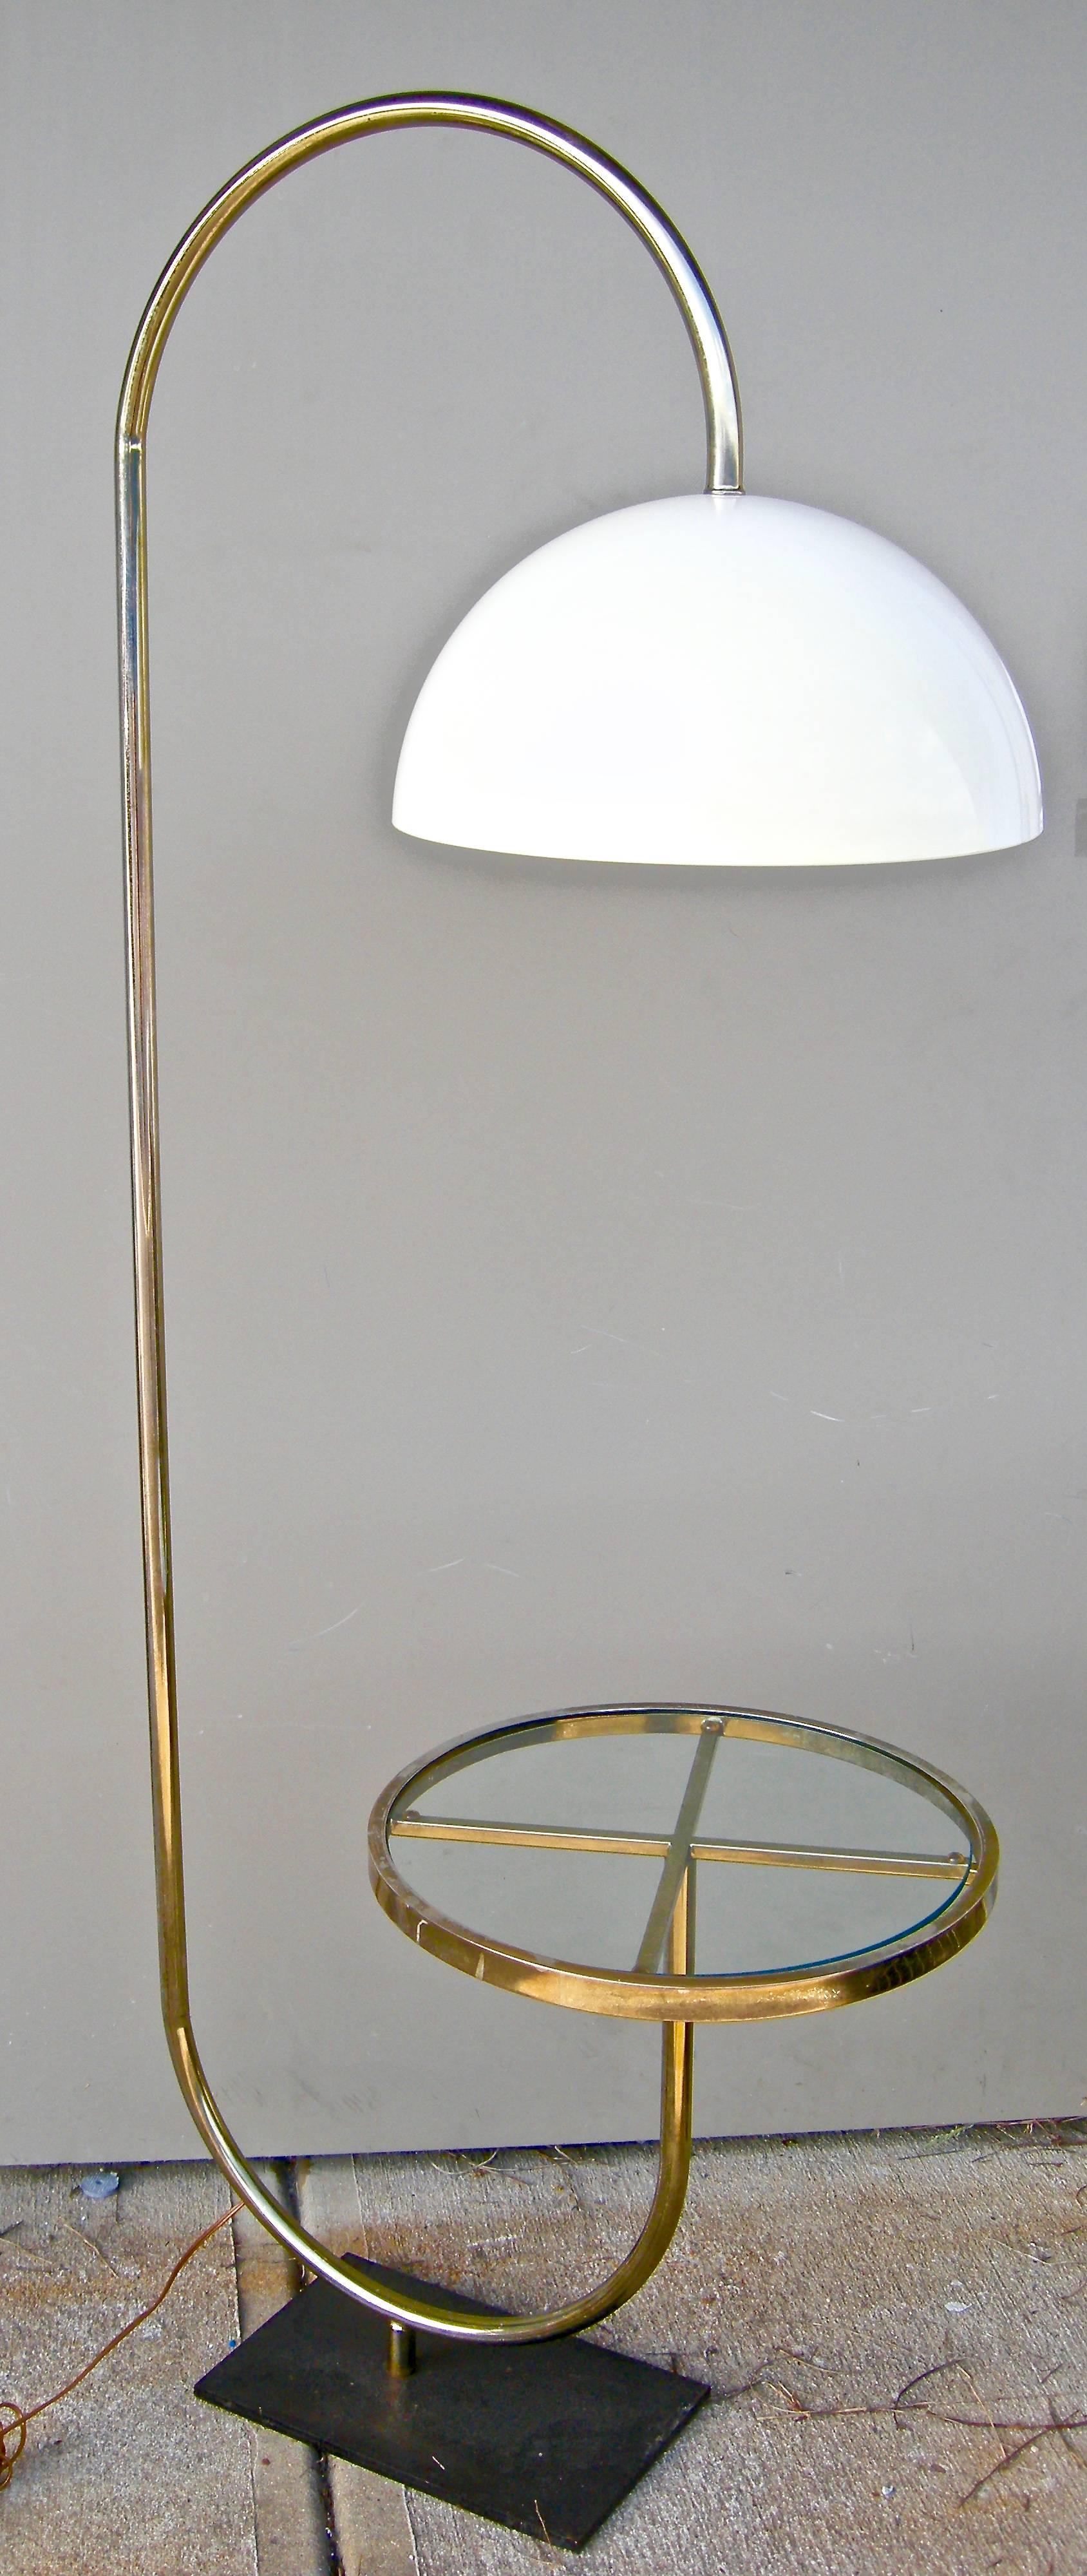 Fantastic vintage, Italian designed, brass floor light in a a graphic tubular shape and form. Having a rotating attached table top with molded plastic dome shade. A sculptural delight.